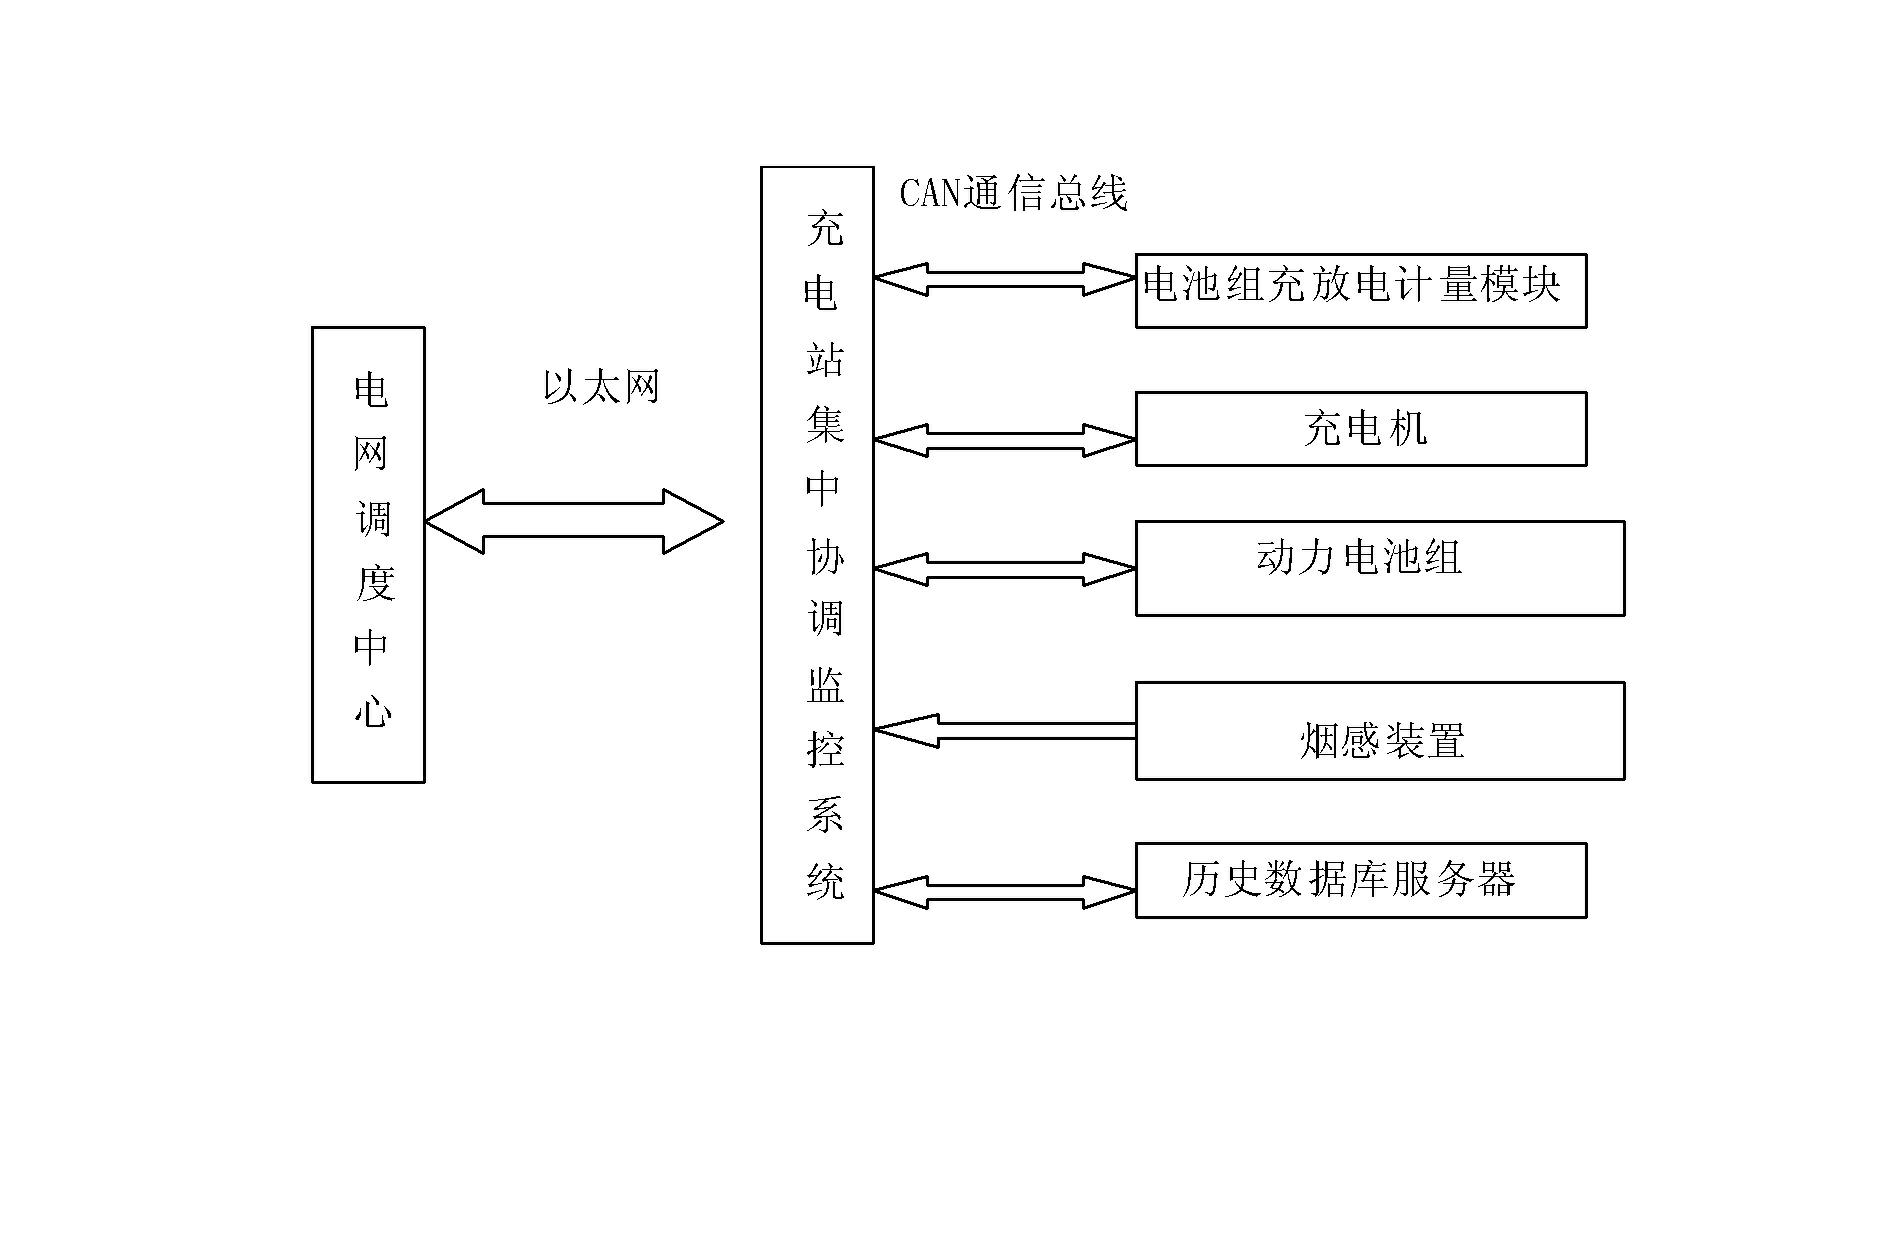 Wind power generation-combined ordered charge and discharge coordinated control system of pure electric vehicle